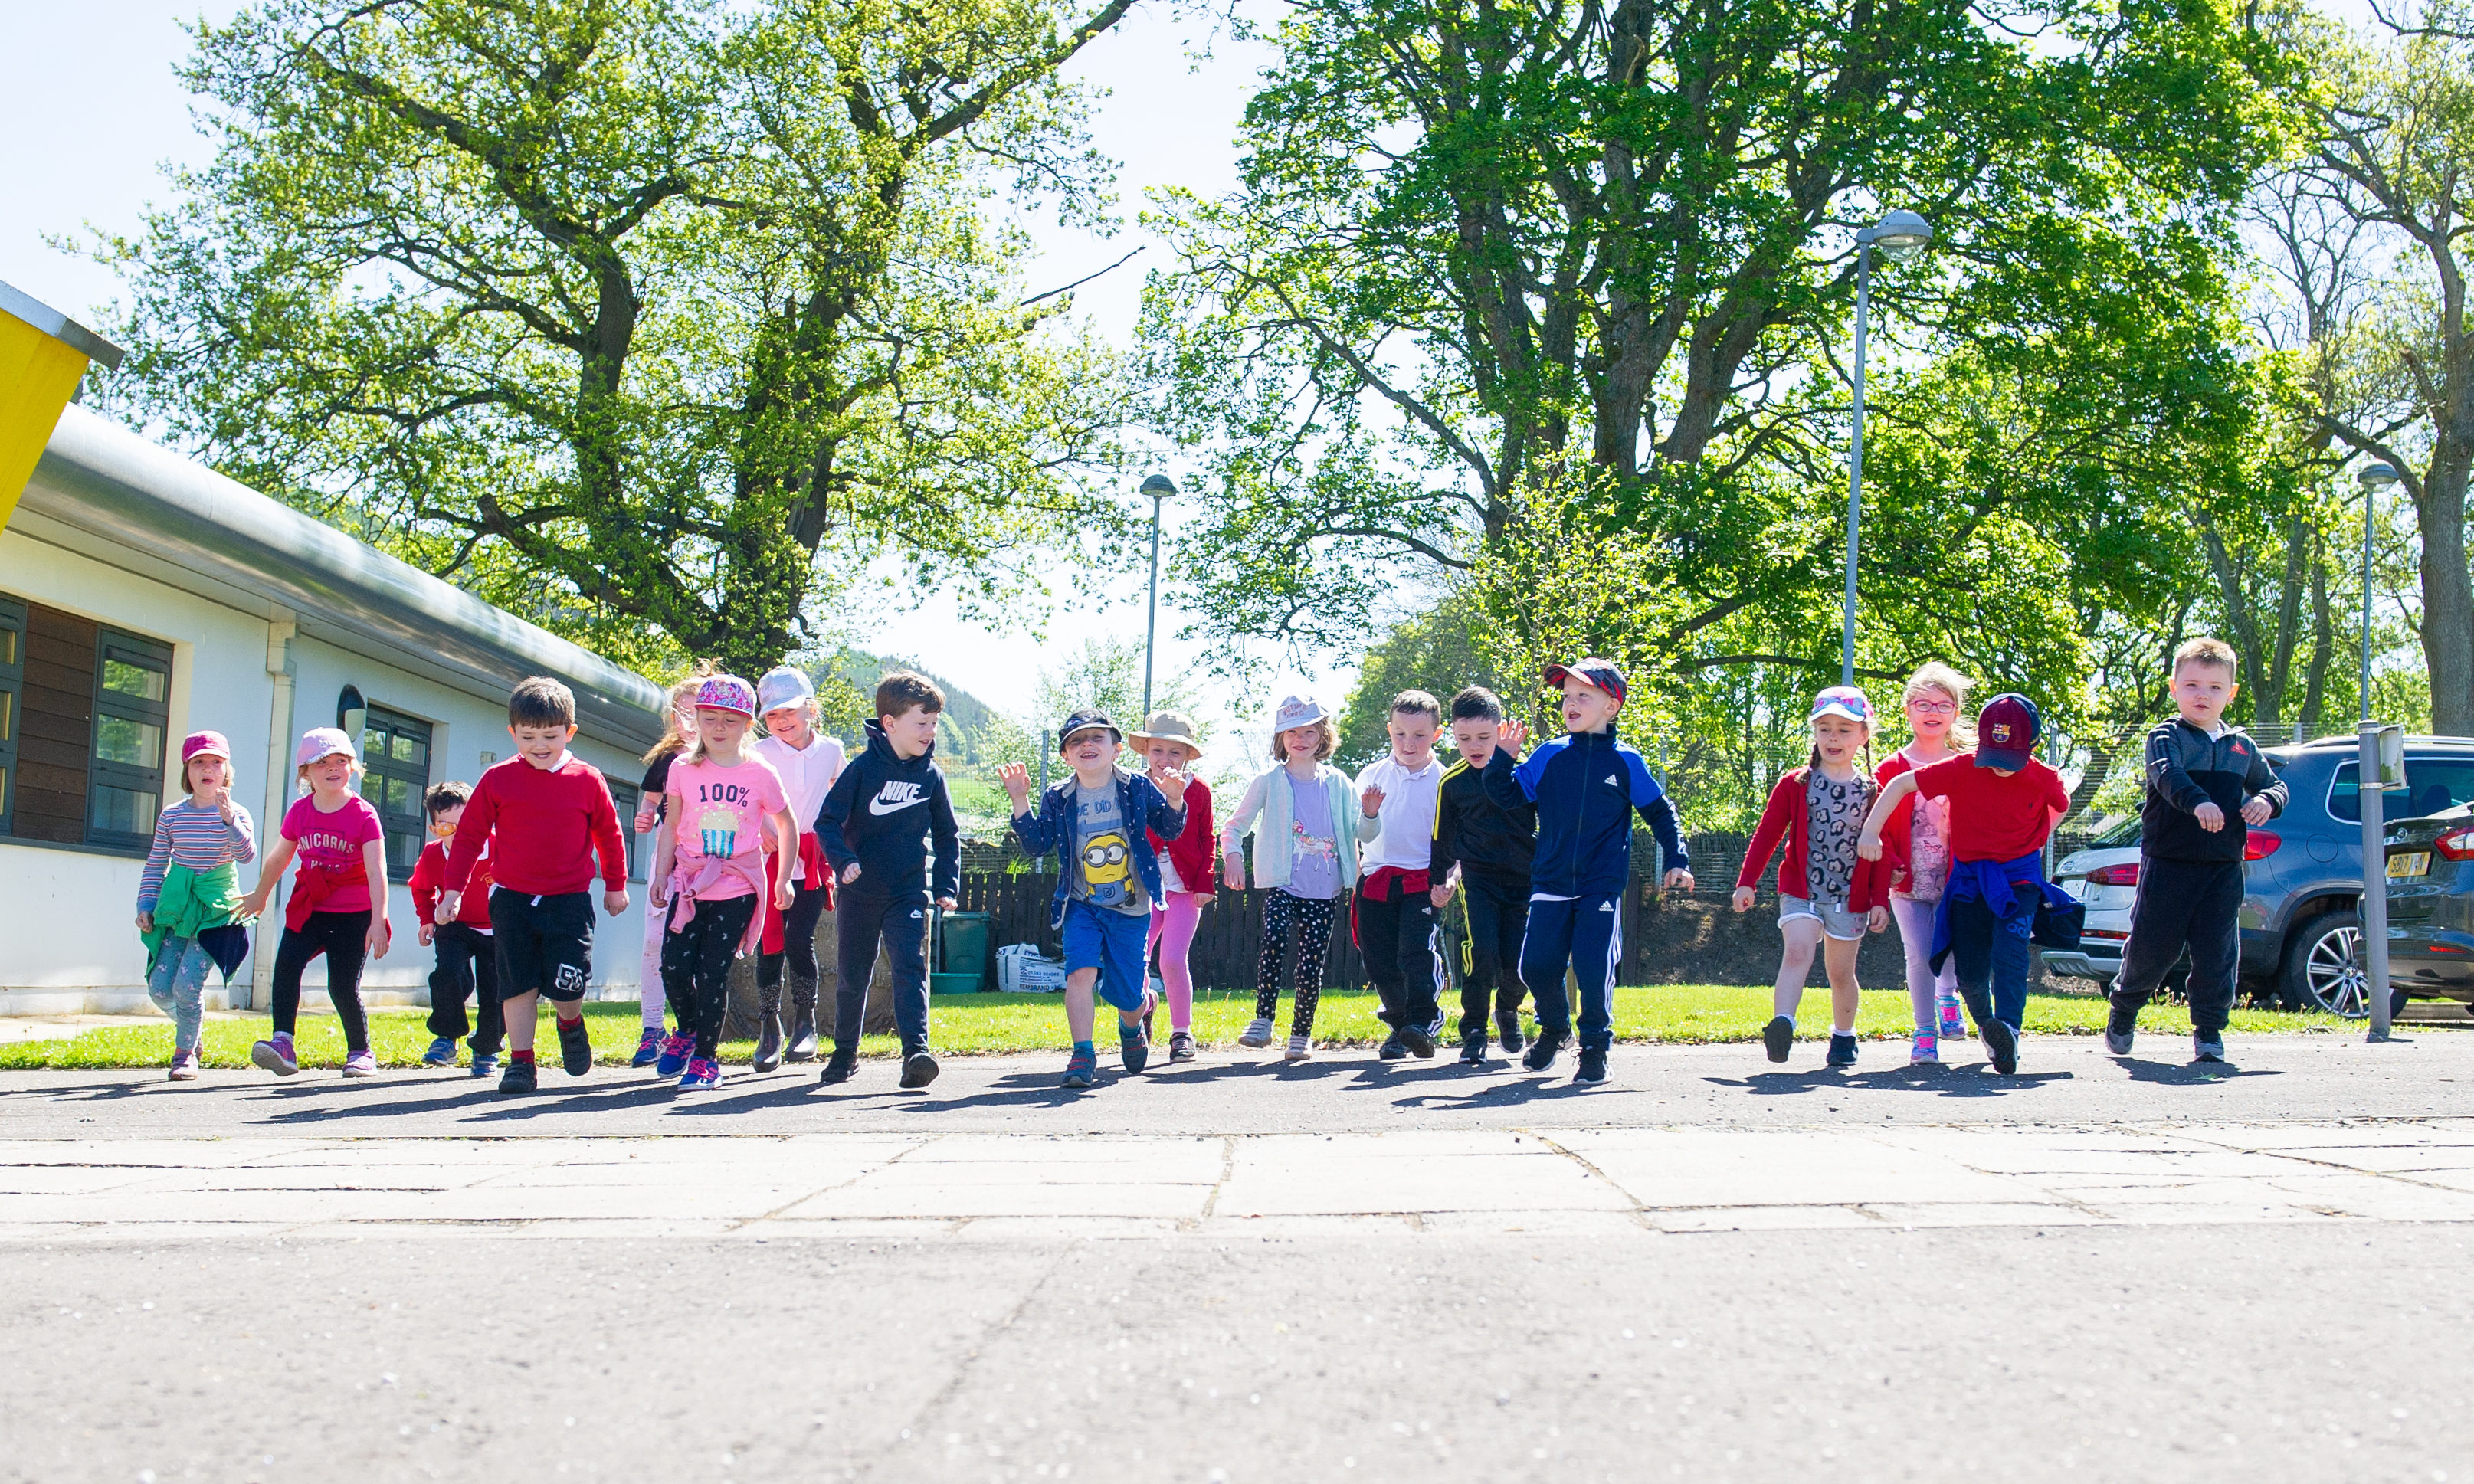 Primary 1 and 2 pupils at Newtyle primary school holding a sponsored walk to raise funds for the school. Pic by Kim Cessford / DCT Media